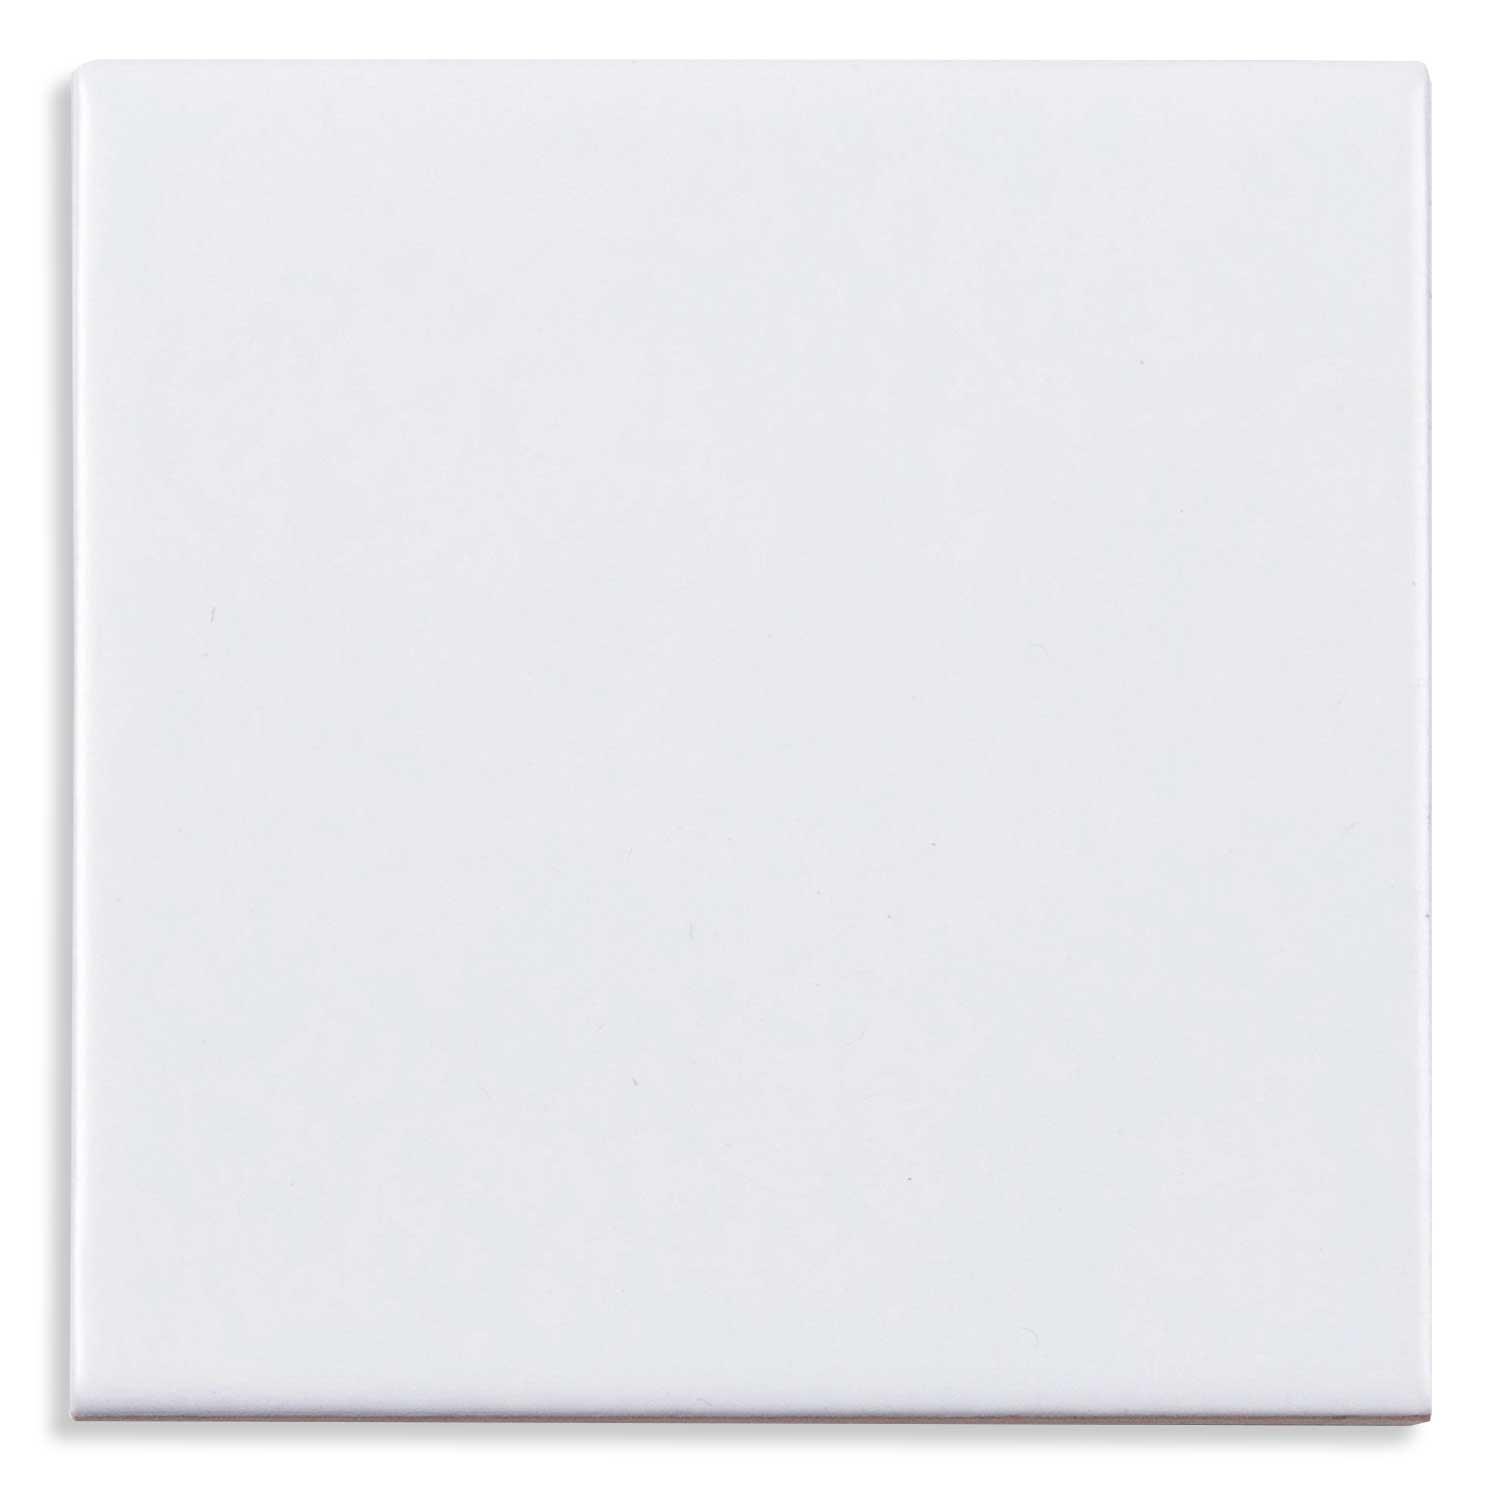 Classic White Ceramic Wall Tile Subway Style 200x200mm